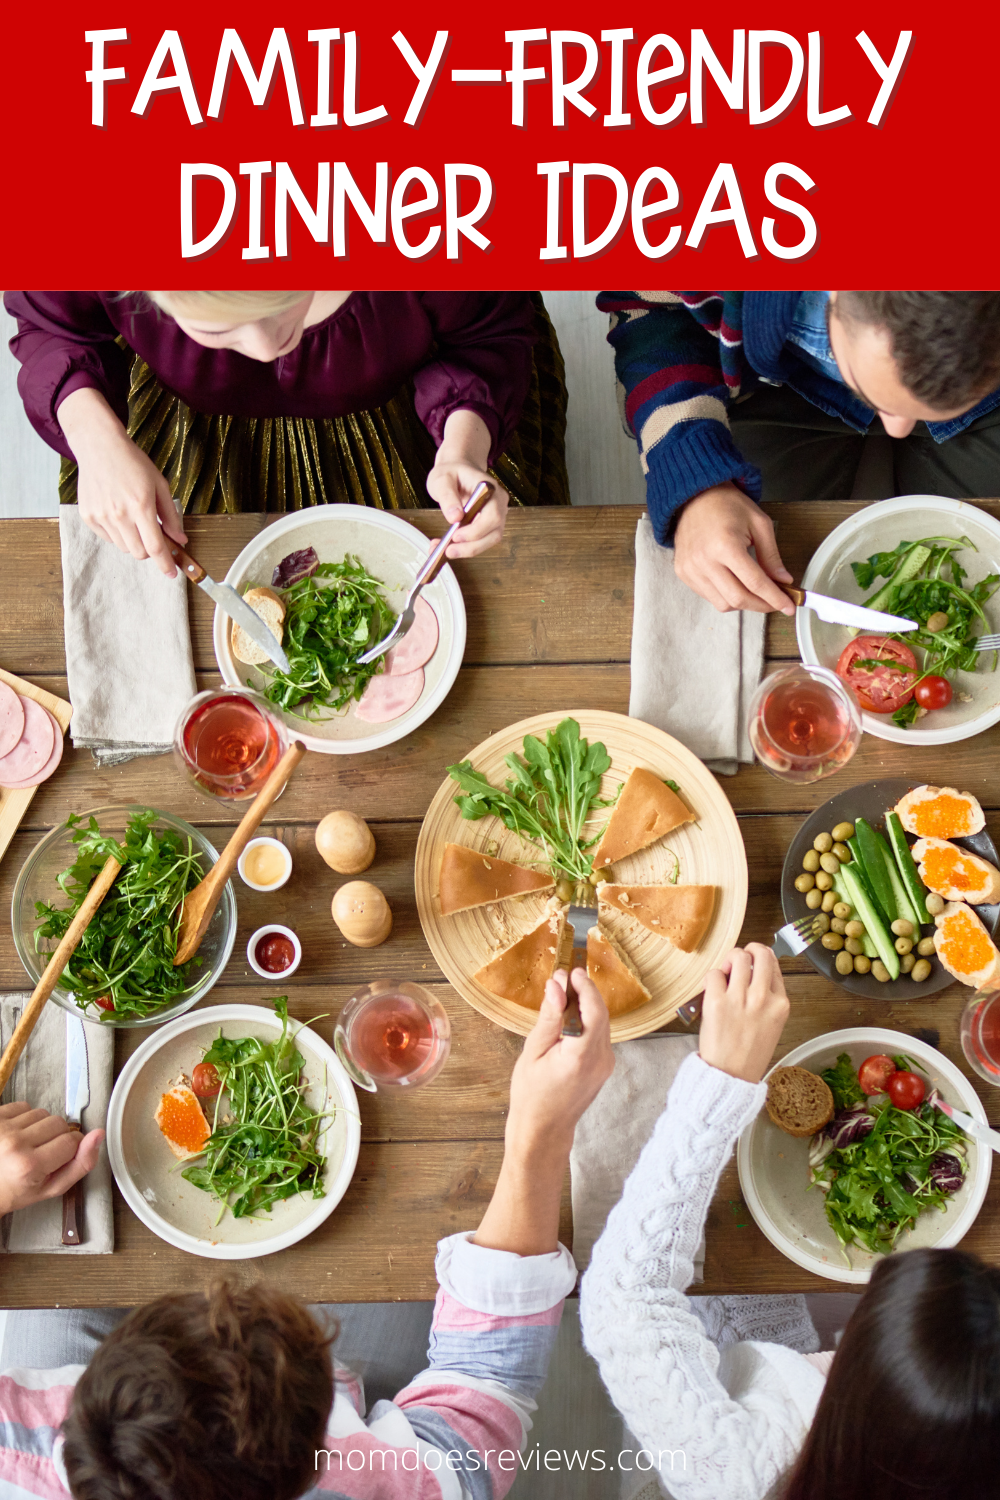 4 Fun and Unique Family-Friendly Dinner Ideas